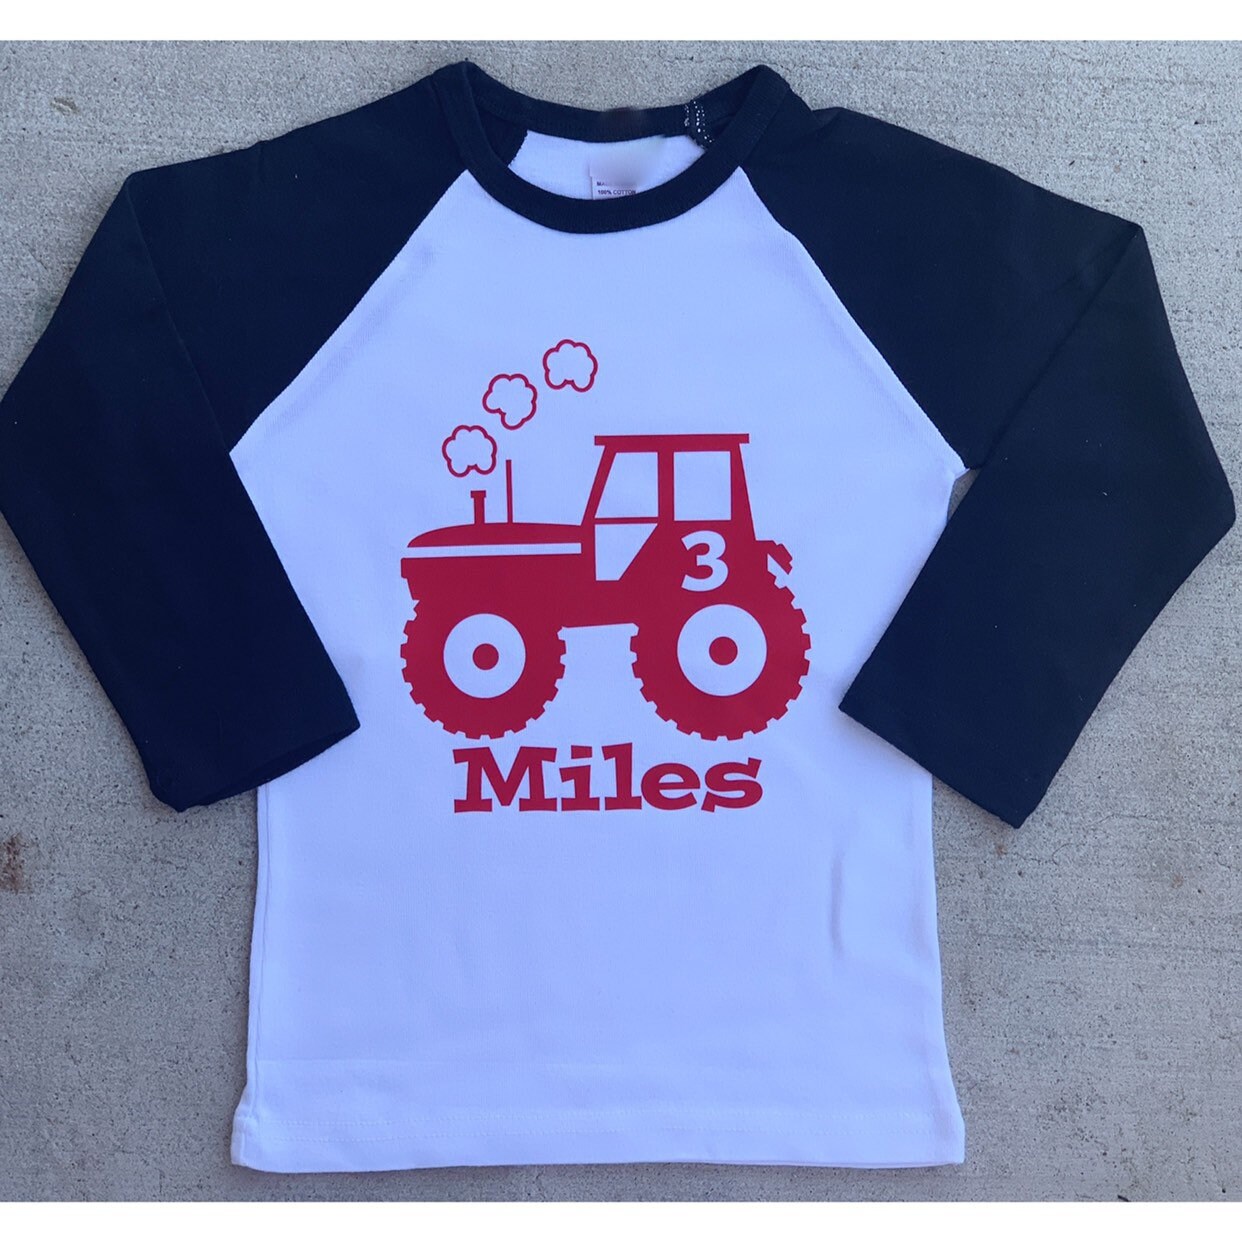 Personalized Tractor Birthday Shirt cropped/long sleeve | Etsy